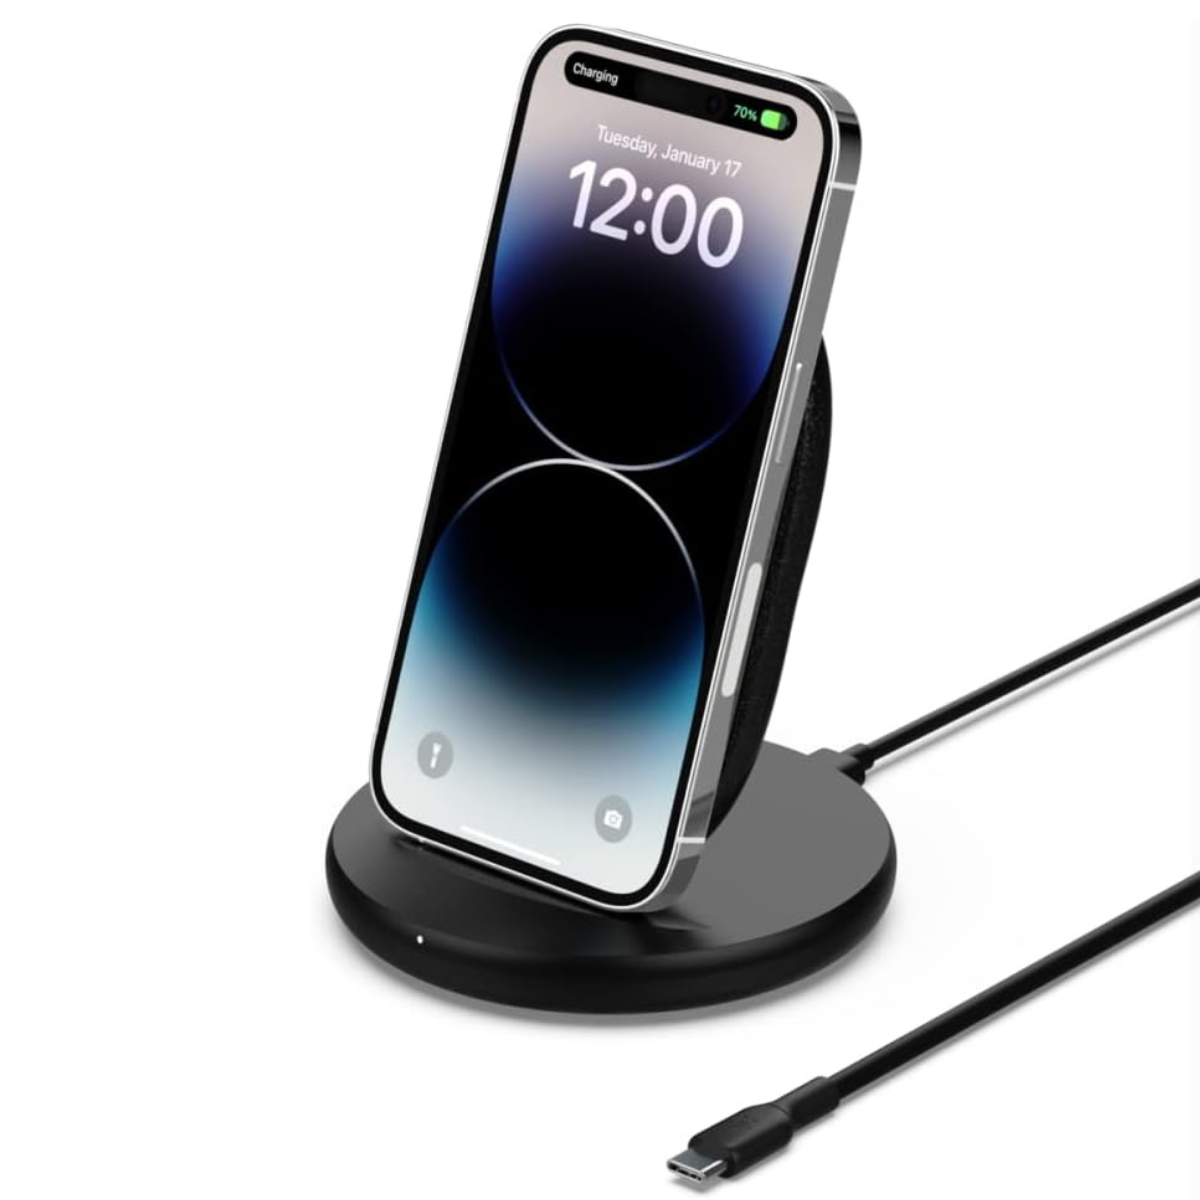 The Belkin 15W Wireless Charging Stand, angled view with phone